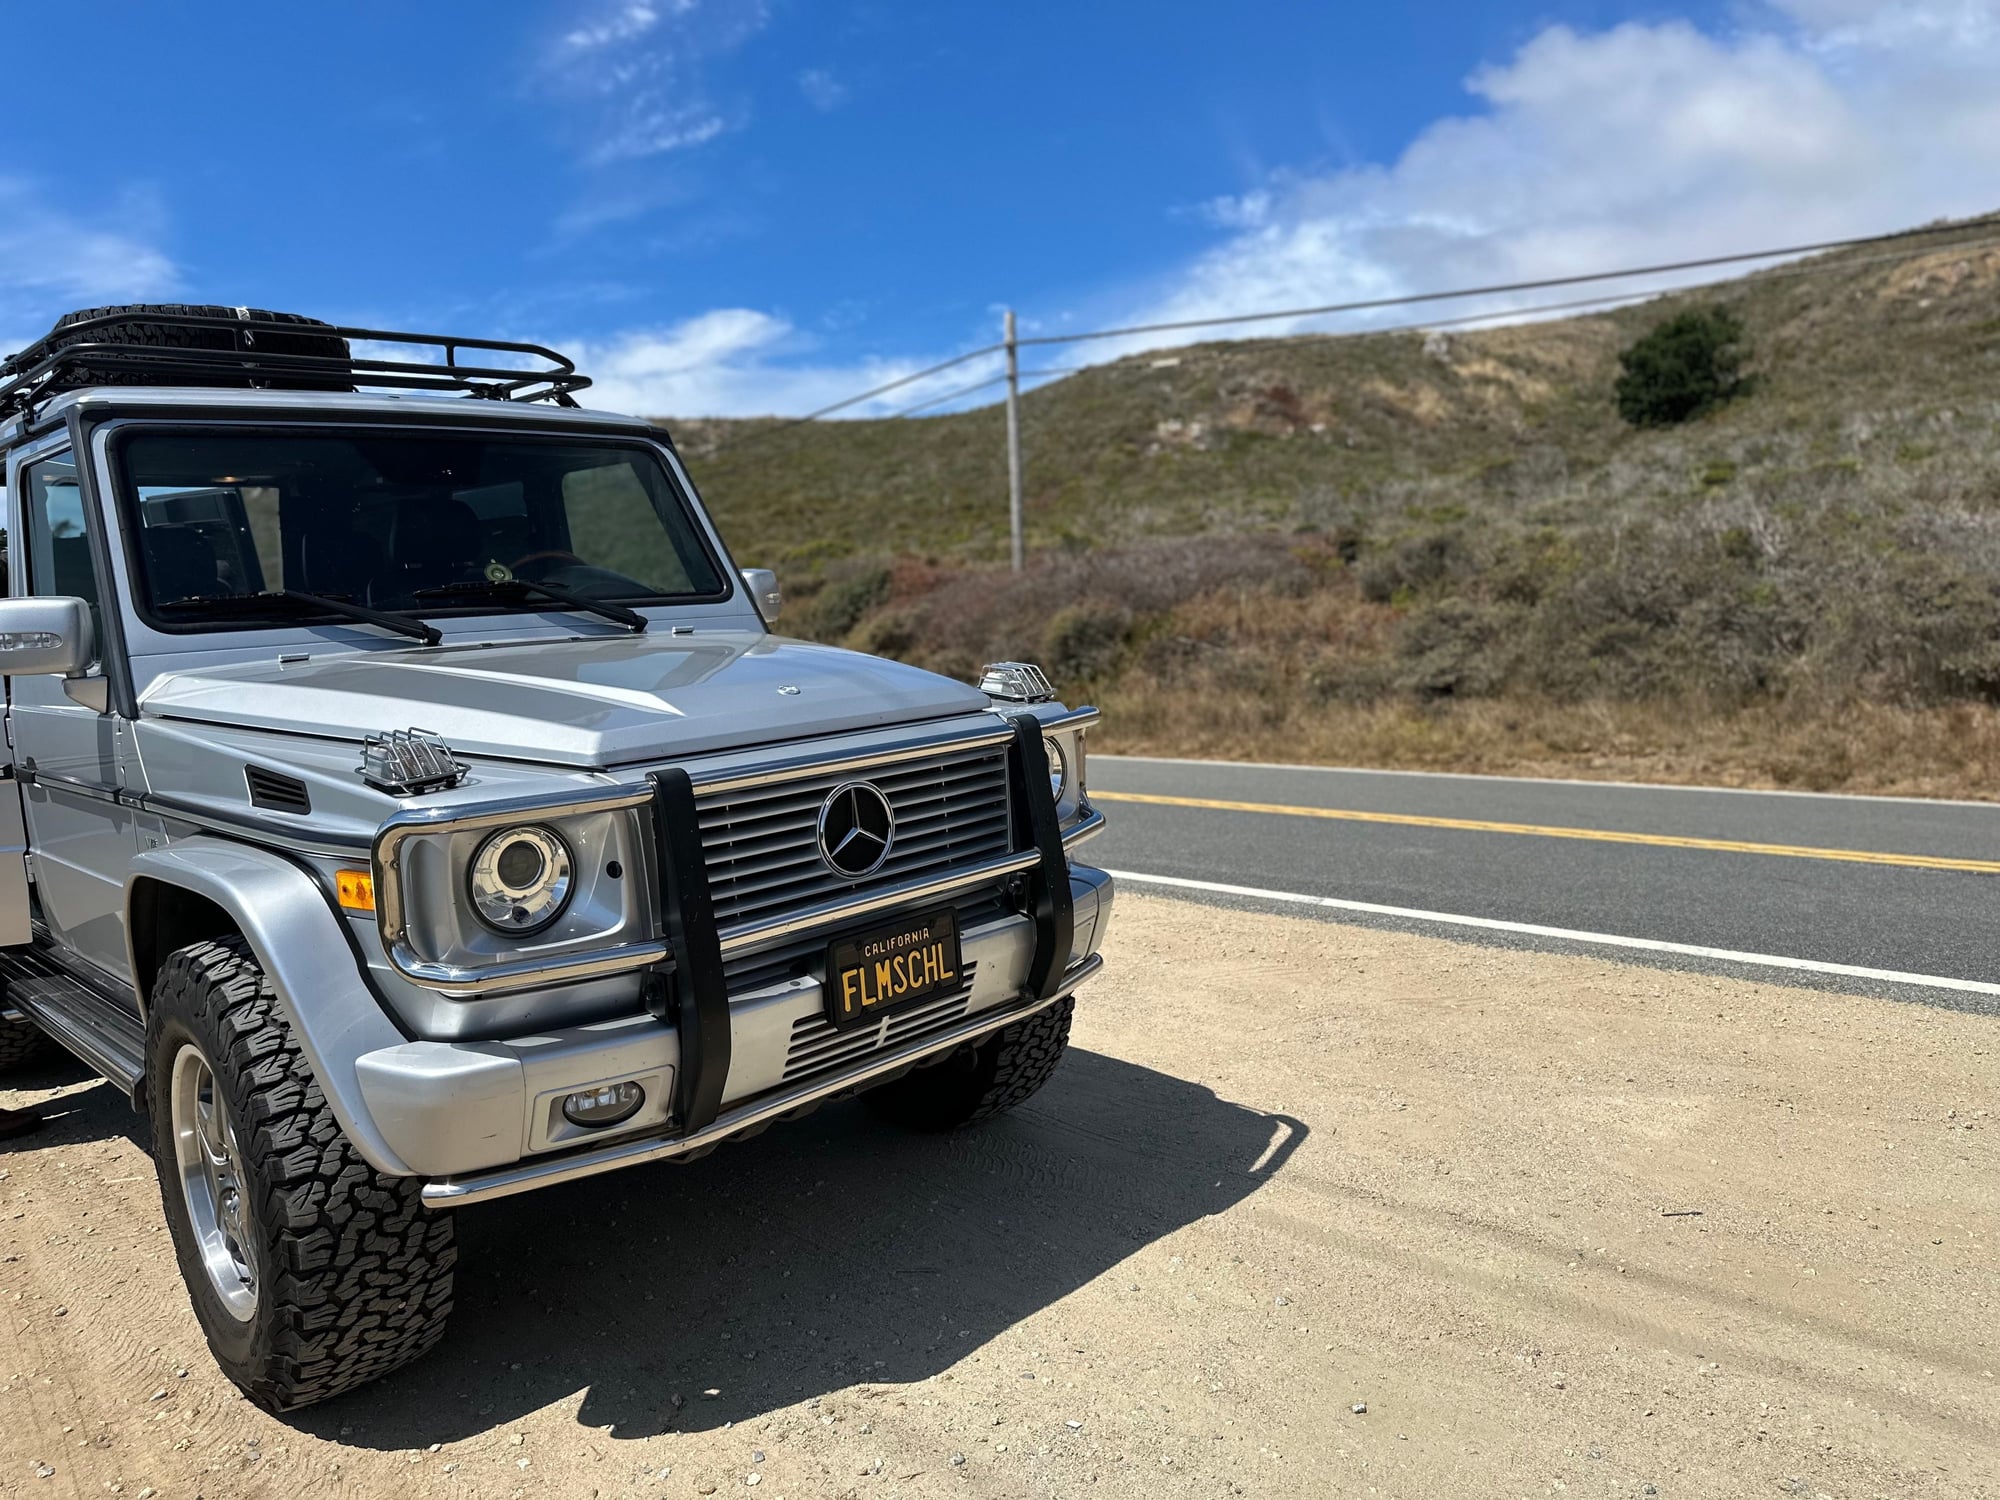 2008 Mercedes-Benz G55 AMG - WTT : 2008 G55 AMG for 2016-2017 AMG GTS - Used - VIN WB105730XS6229837 - 93,000 Miles - 8 cyl - AWD - Automatic - SUV - Silver - Los Angeles, CA 90026, United States